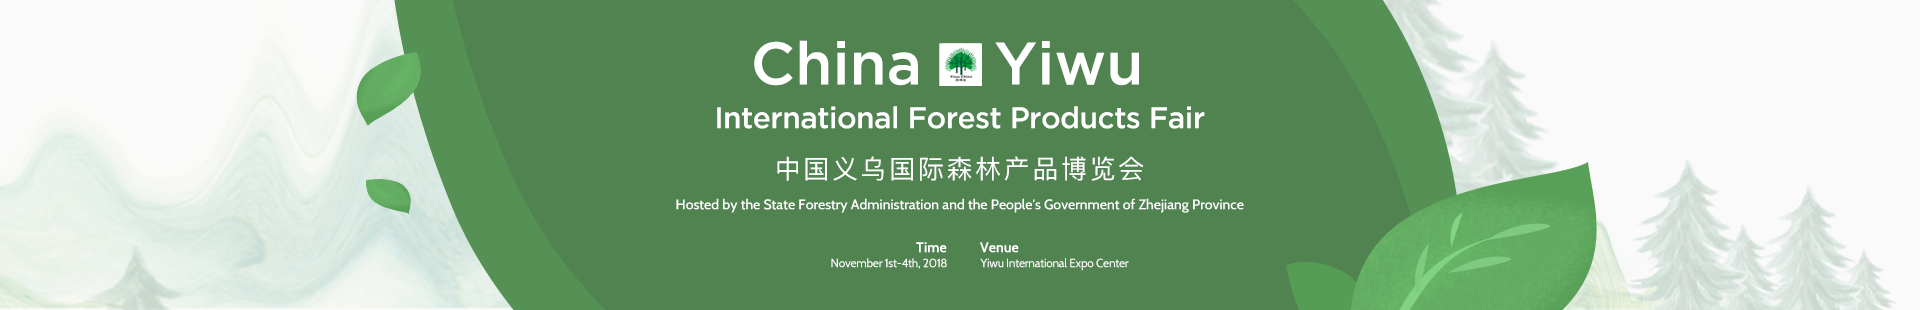 China Yiwu International Forest Products Fair 